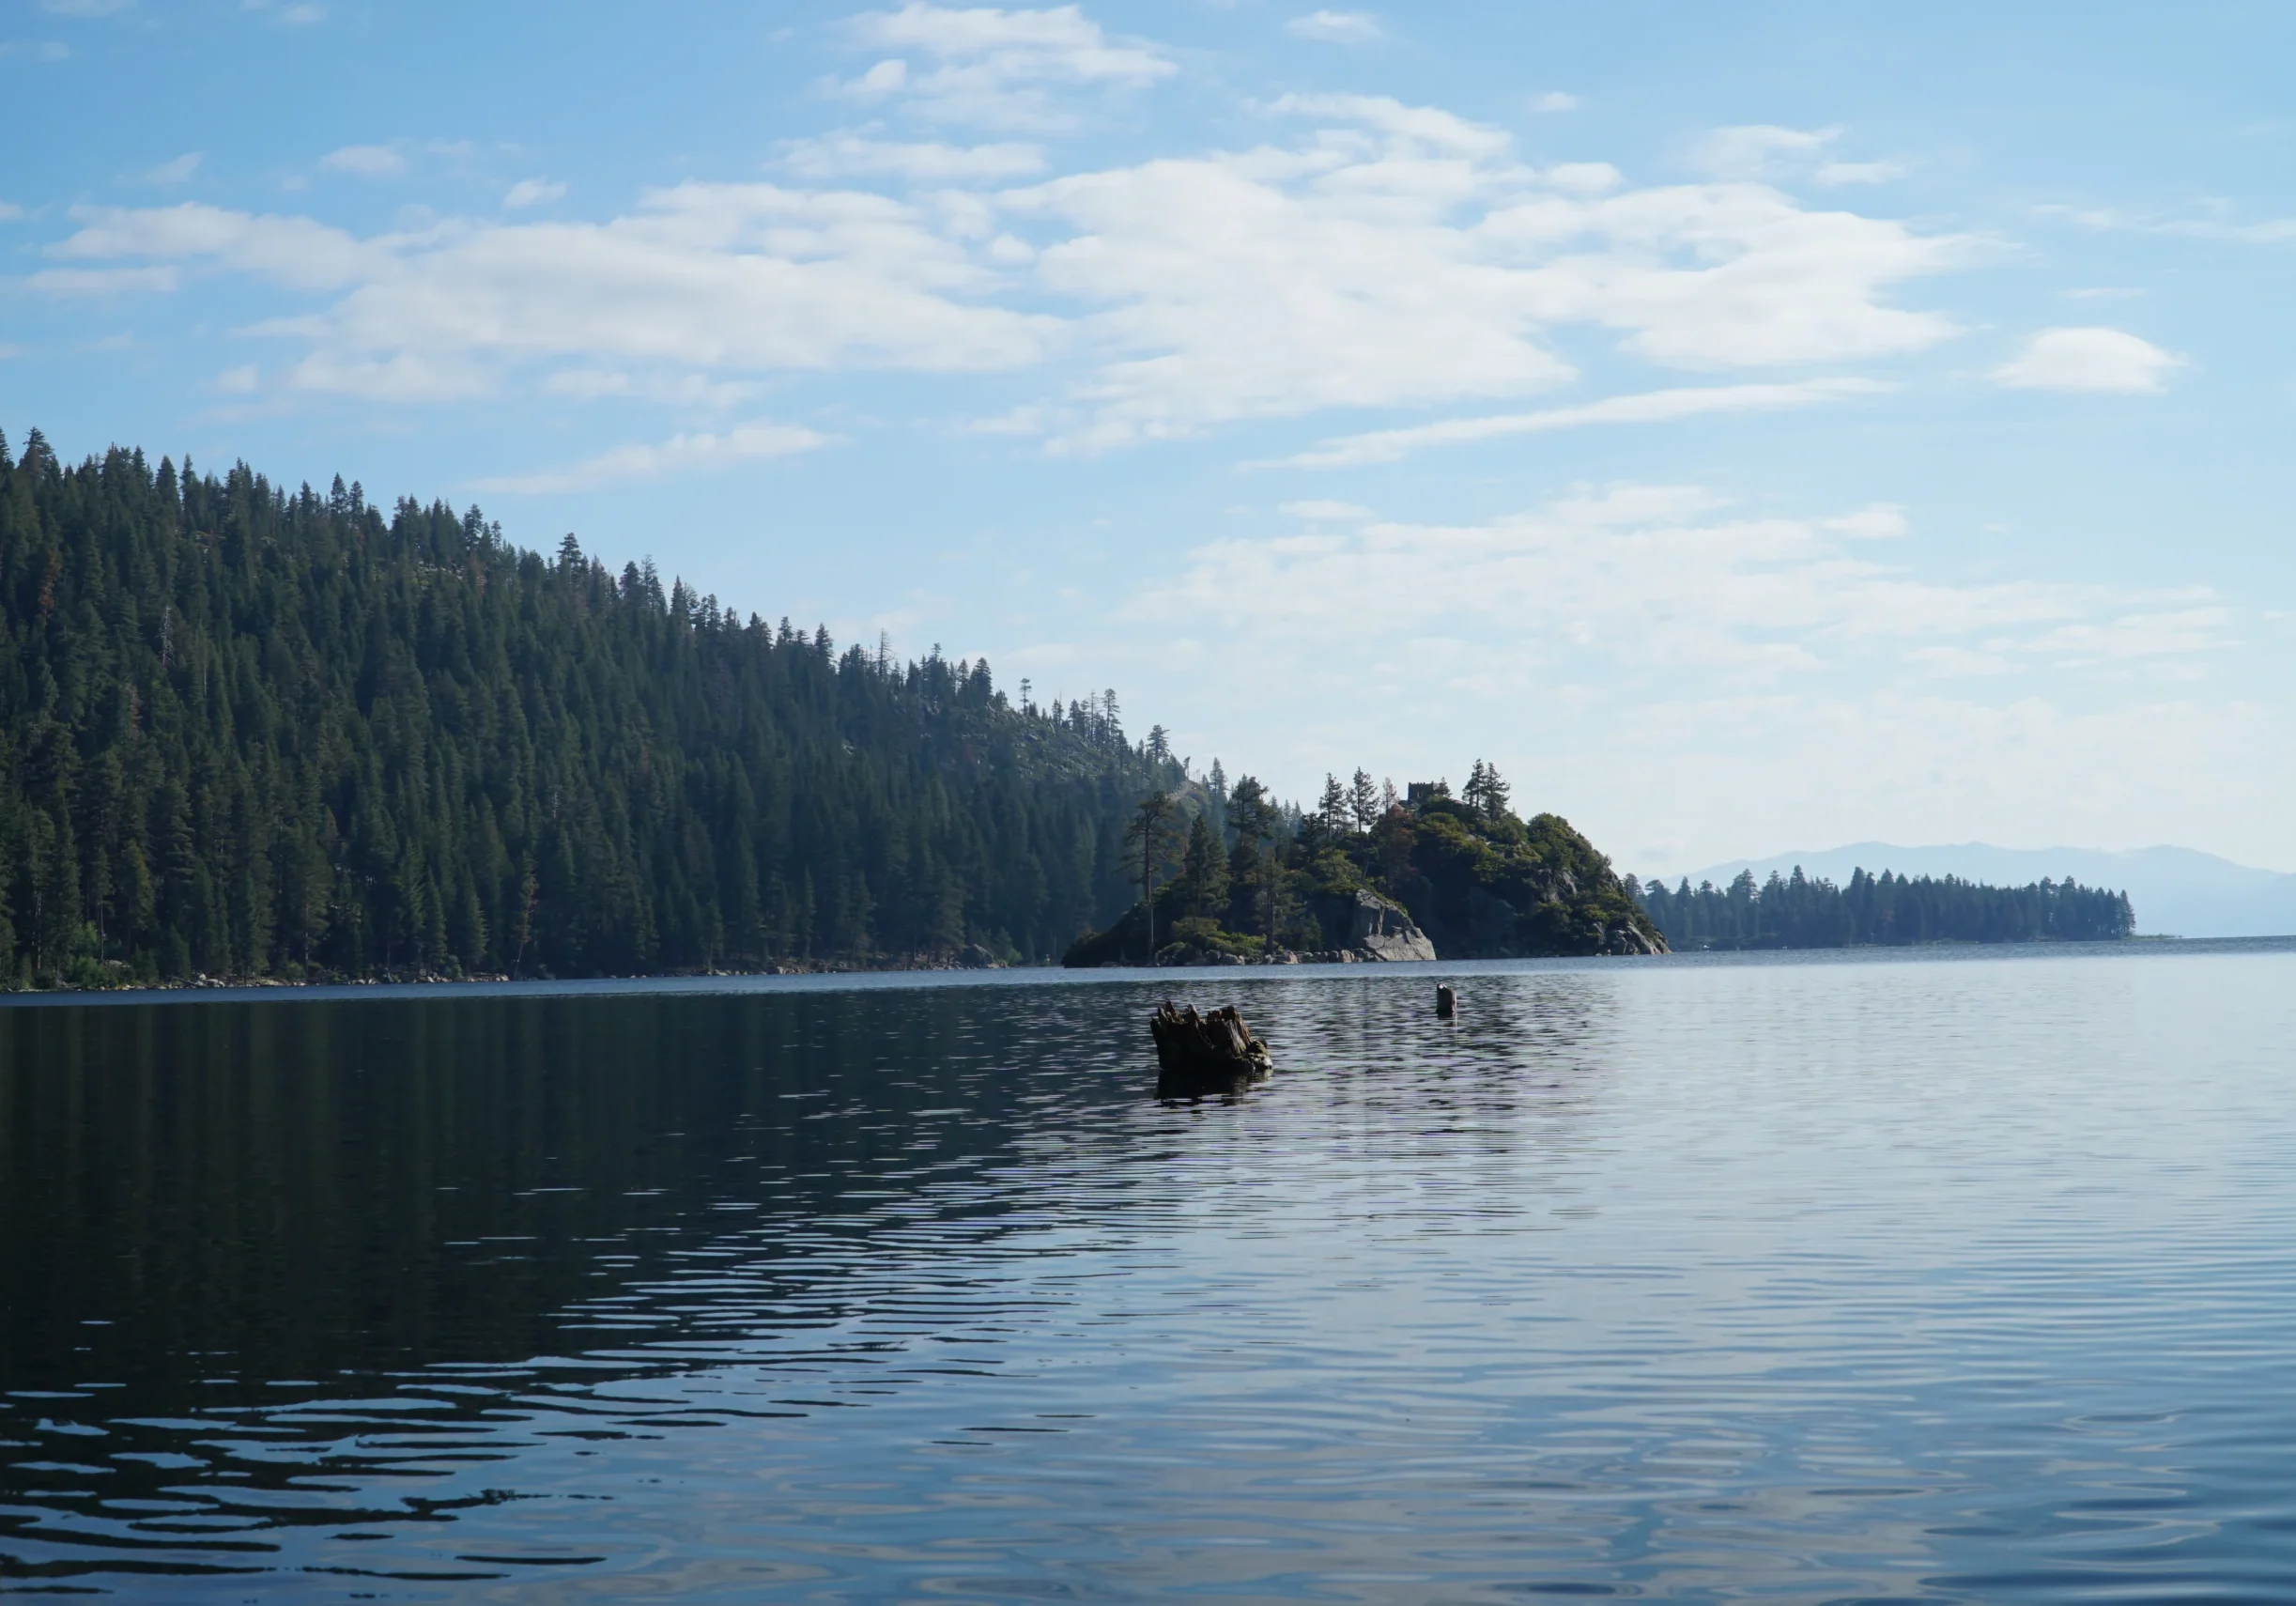 A calm deep blue lake with an evergreen forest in the background